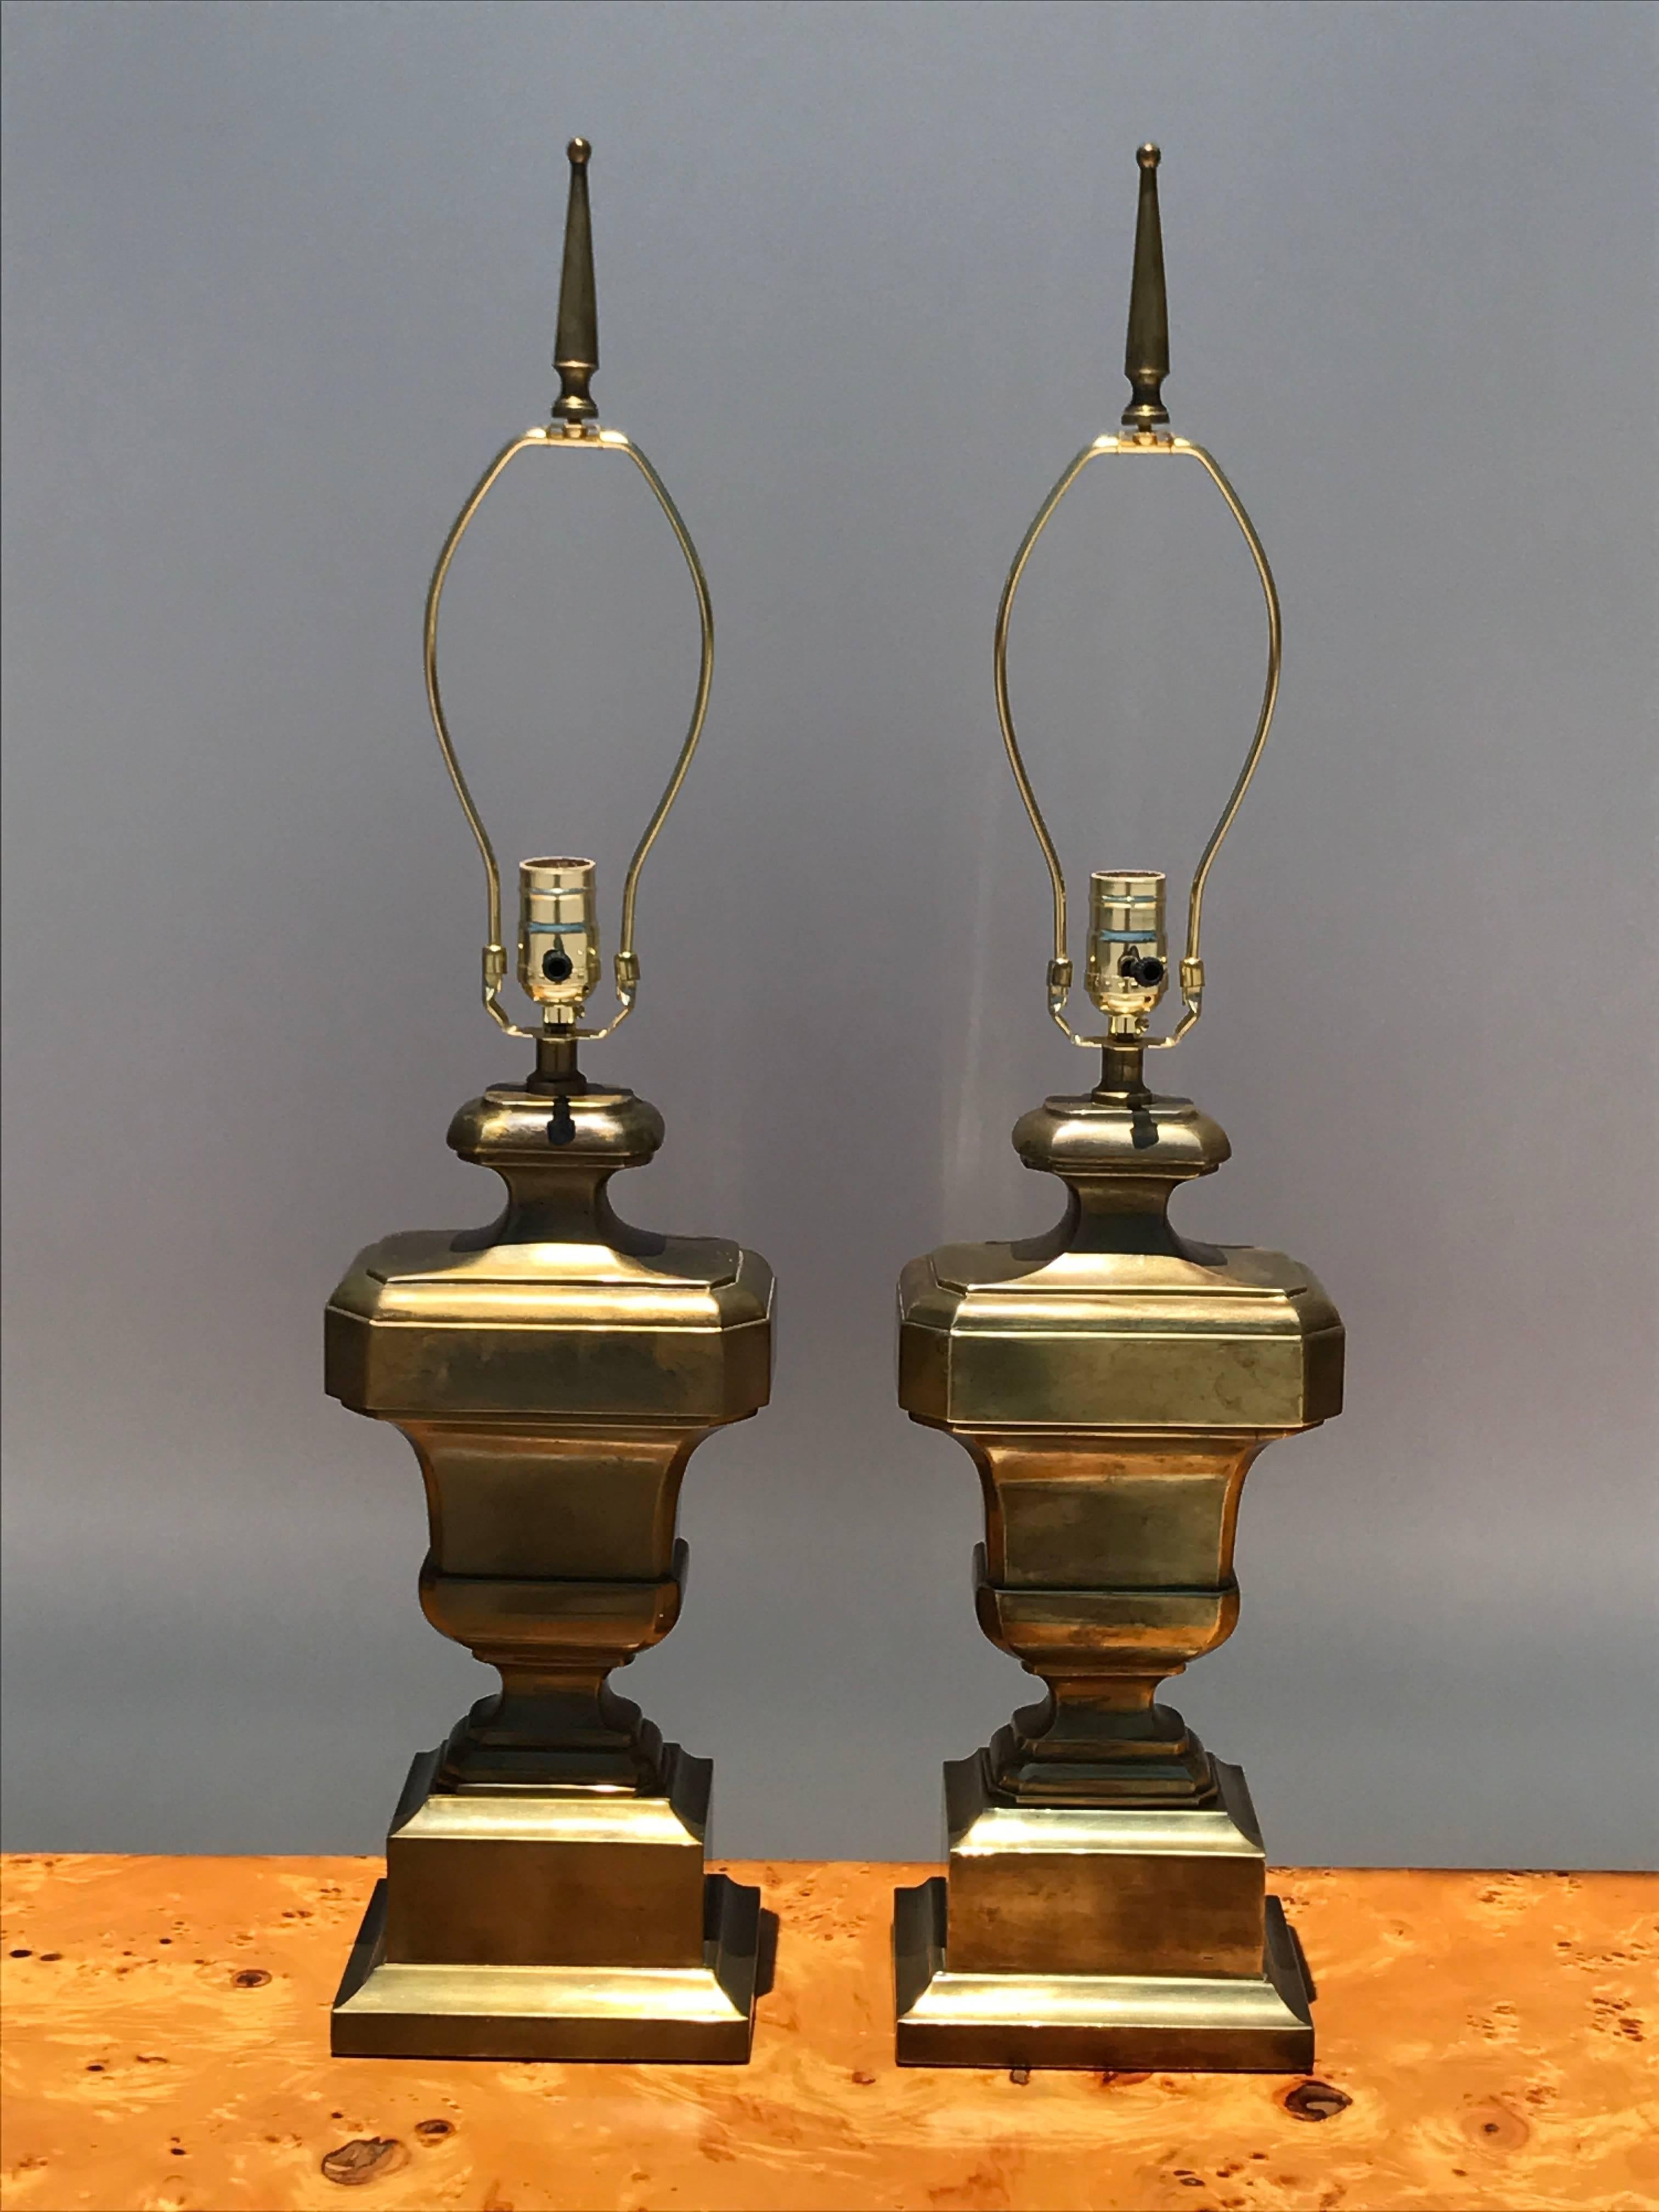 Pair of neoclassical urn patinated brass lamps with original shades.
Lamps without shades measure 31 high, 7.5 wide and 5.5 deep
One shade is little darker in color but once lit doesn't show the color variation.